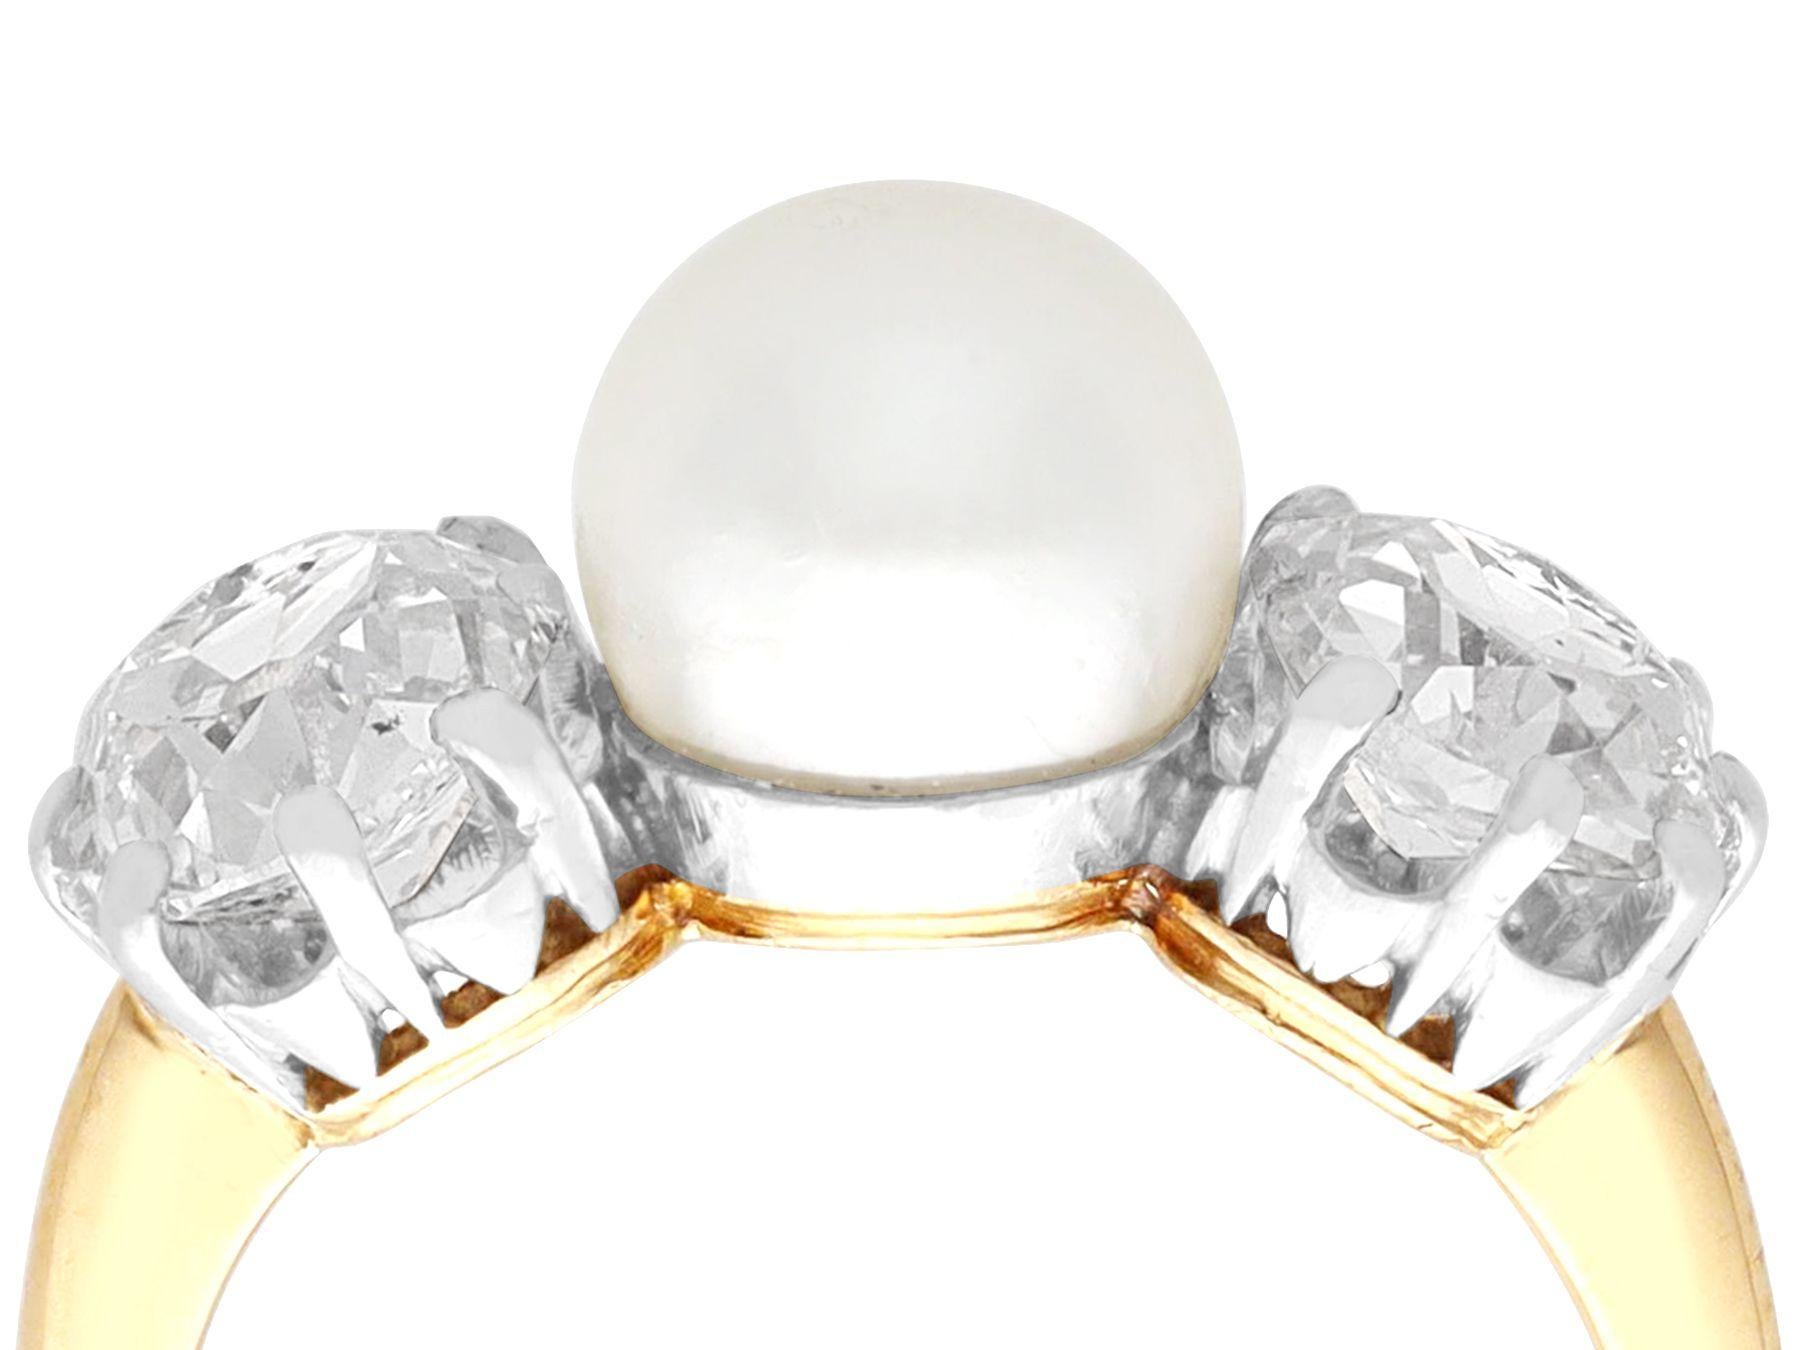 A stunning, fine and impressive 1.70 carat diamond and natural saltwater pearl, 18 karat yellow gold and platinum trilogy ring; part of our diverse antique jewellery and estate jewelry collections.

This stunning, fine and impressive antique trilogy